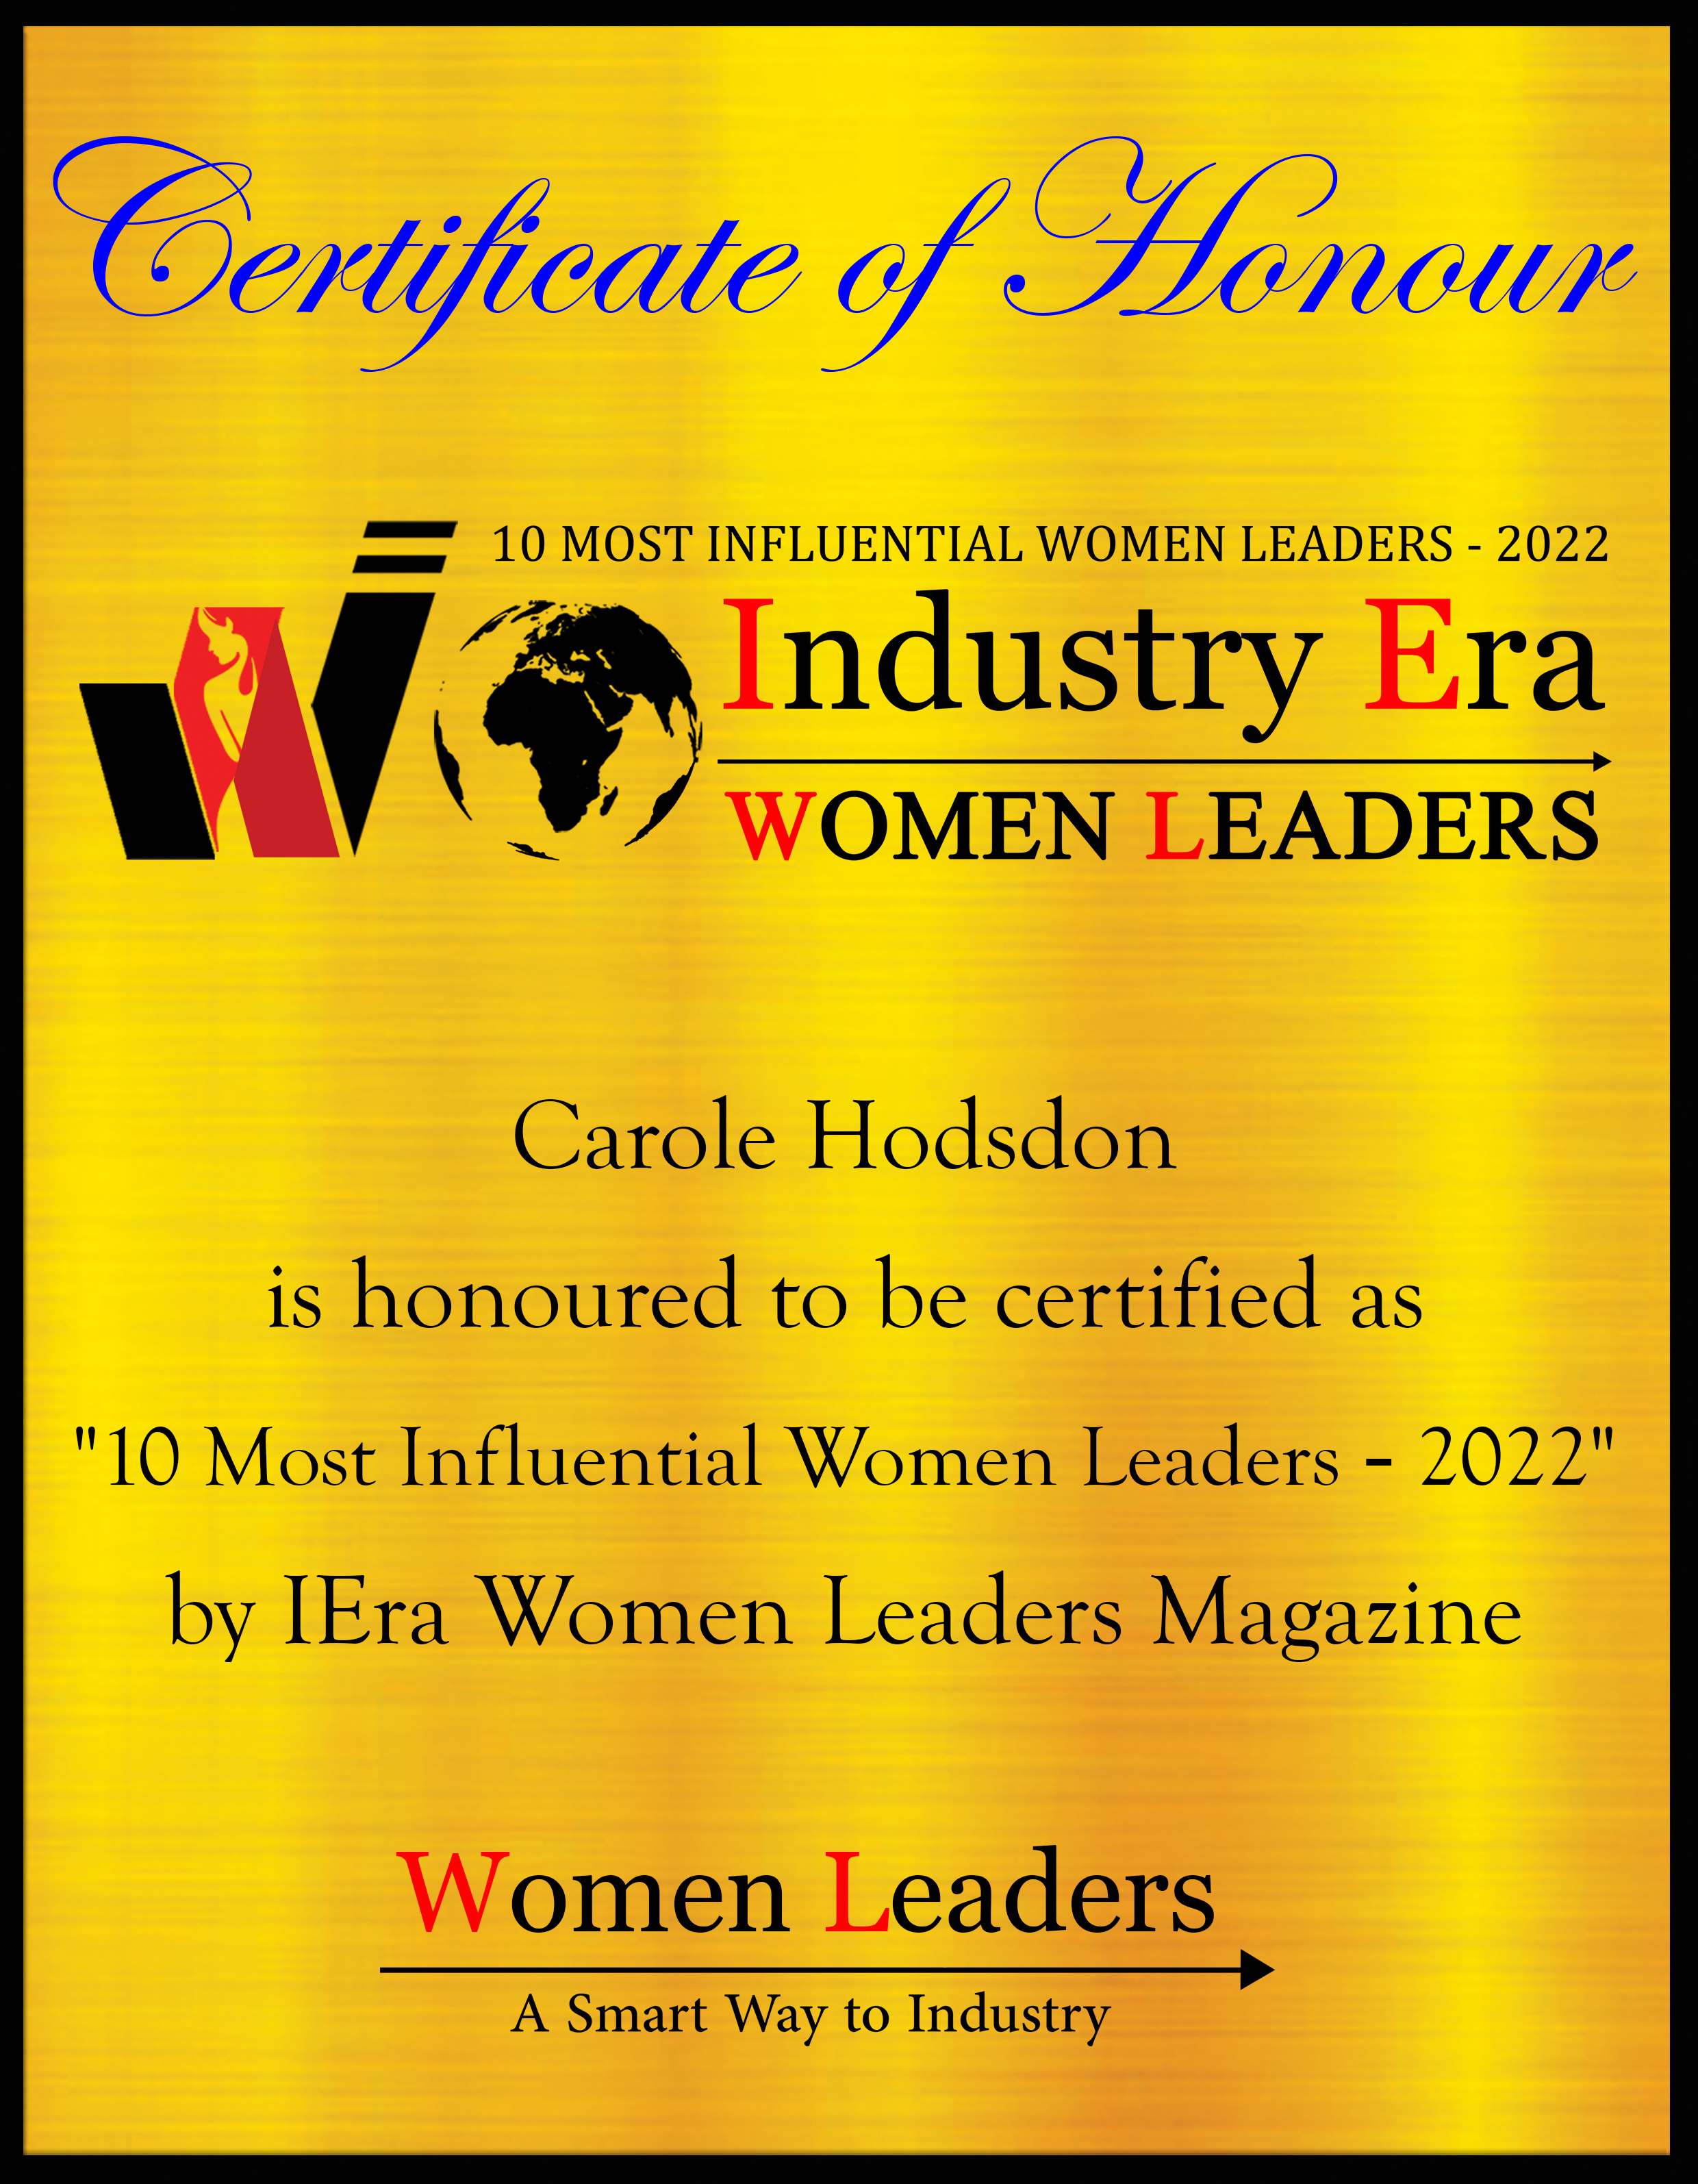 Carole Hodsdon, CIO of Help at Home, 10 Most Influential Women Leaders of 2022